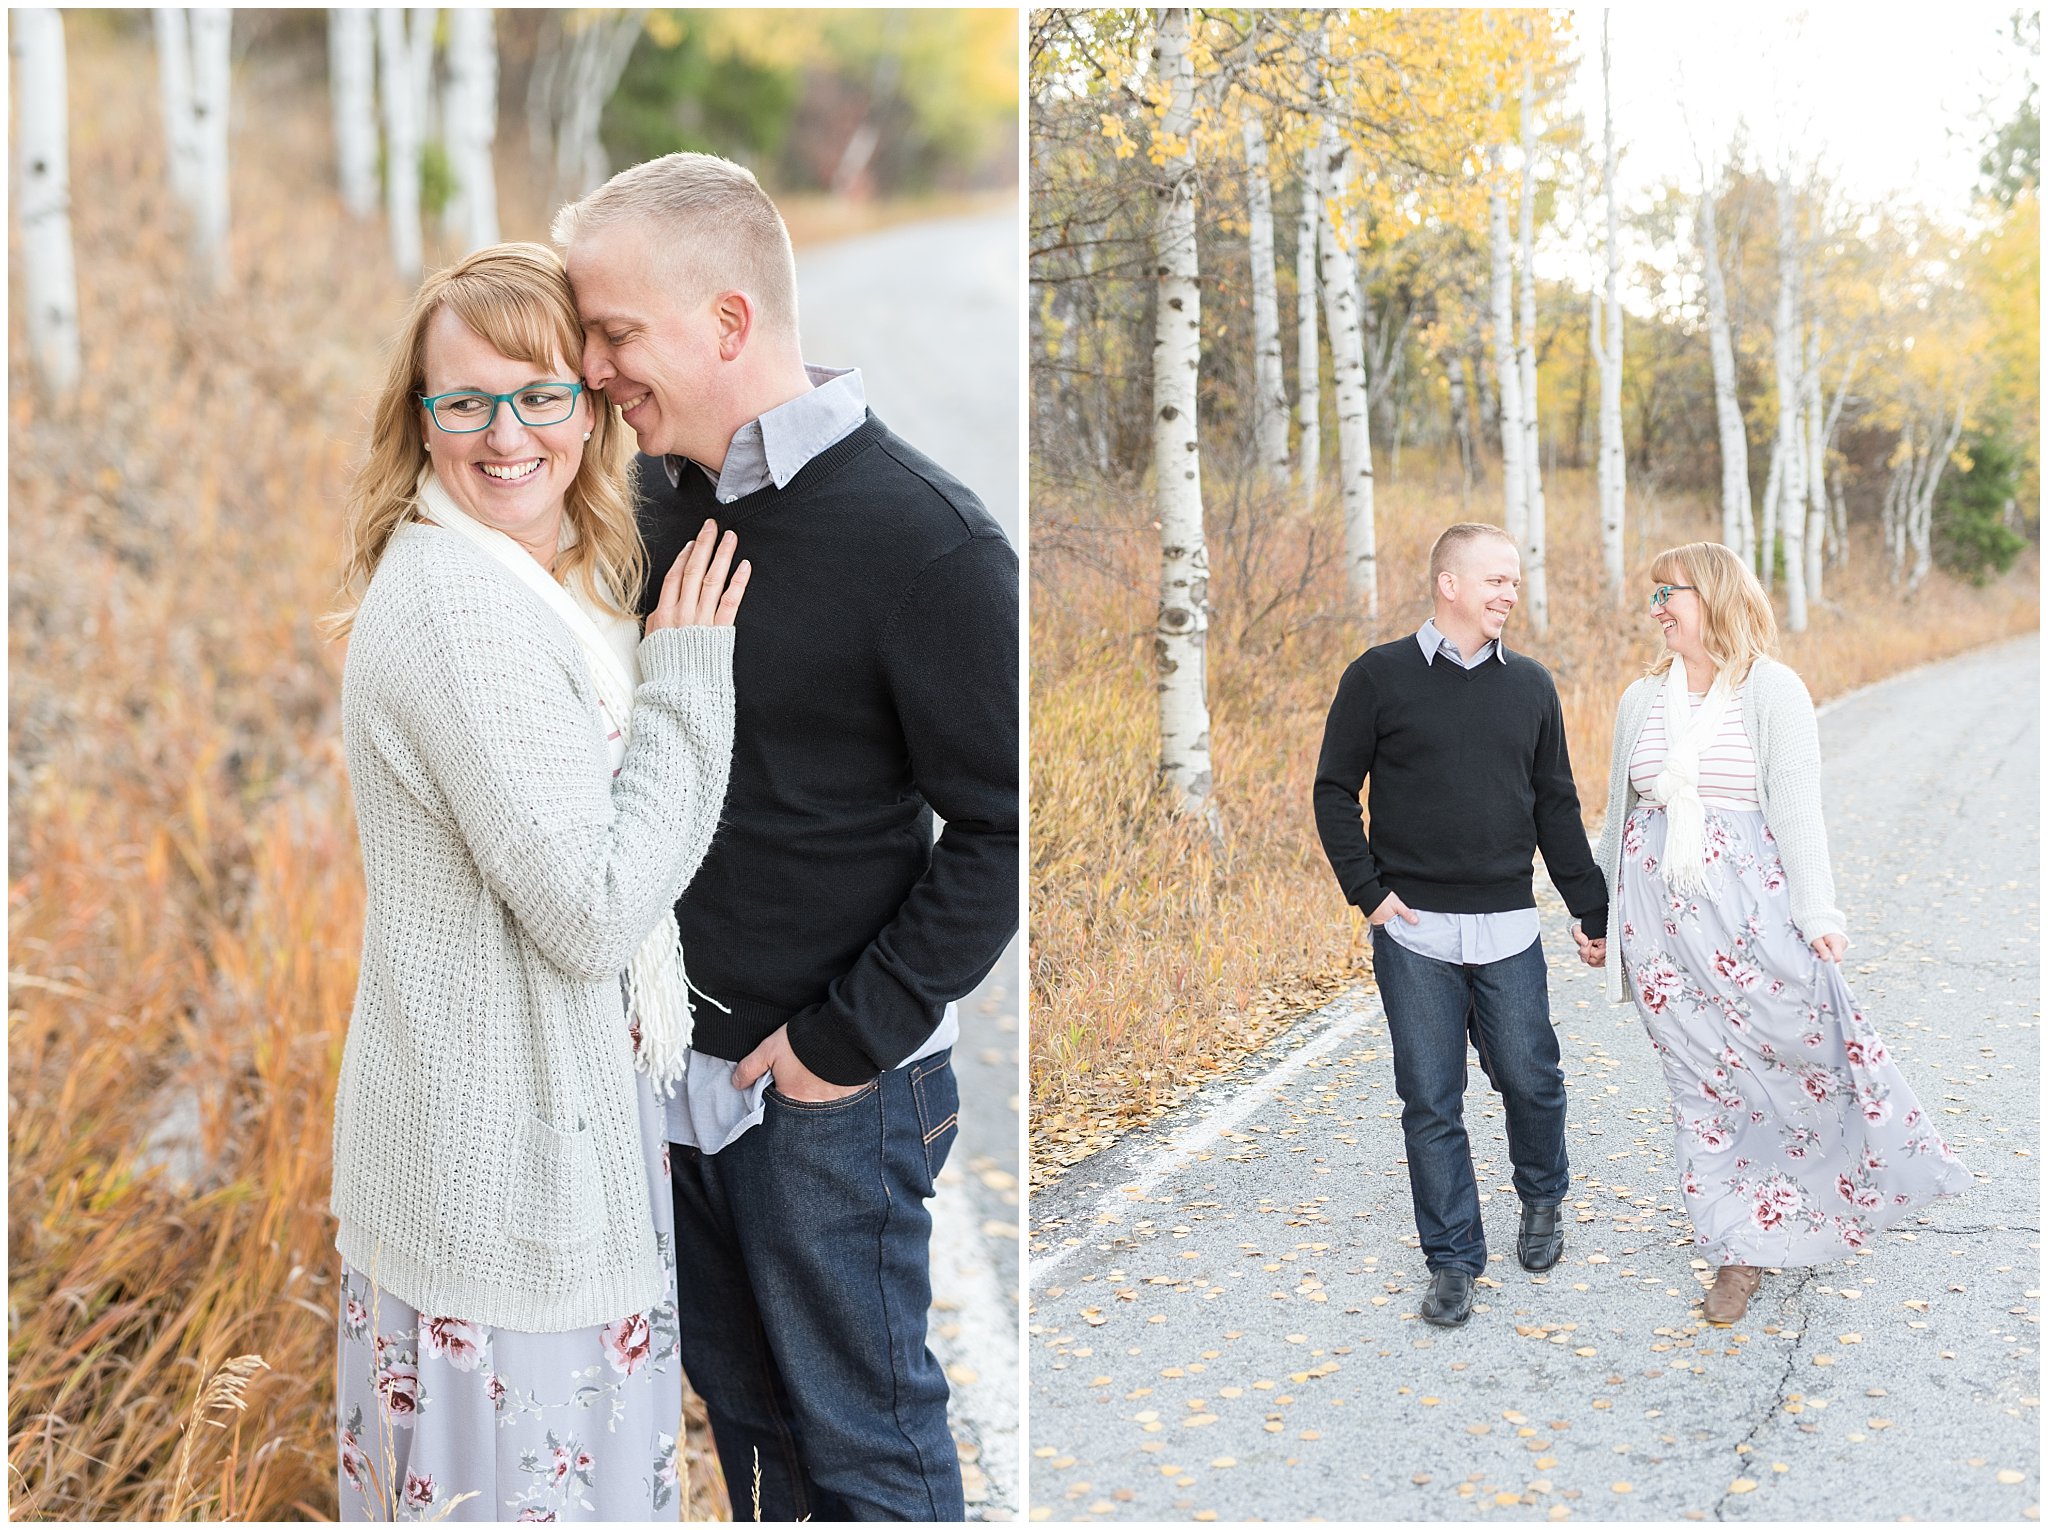 Couple nuzzling and walking in the fall leaves | Fall Family Pictures in the Mountains | Snowbasin, Utah | Jessie and Dallin Photography